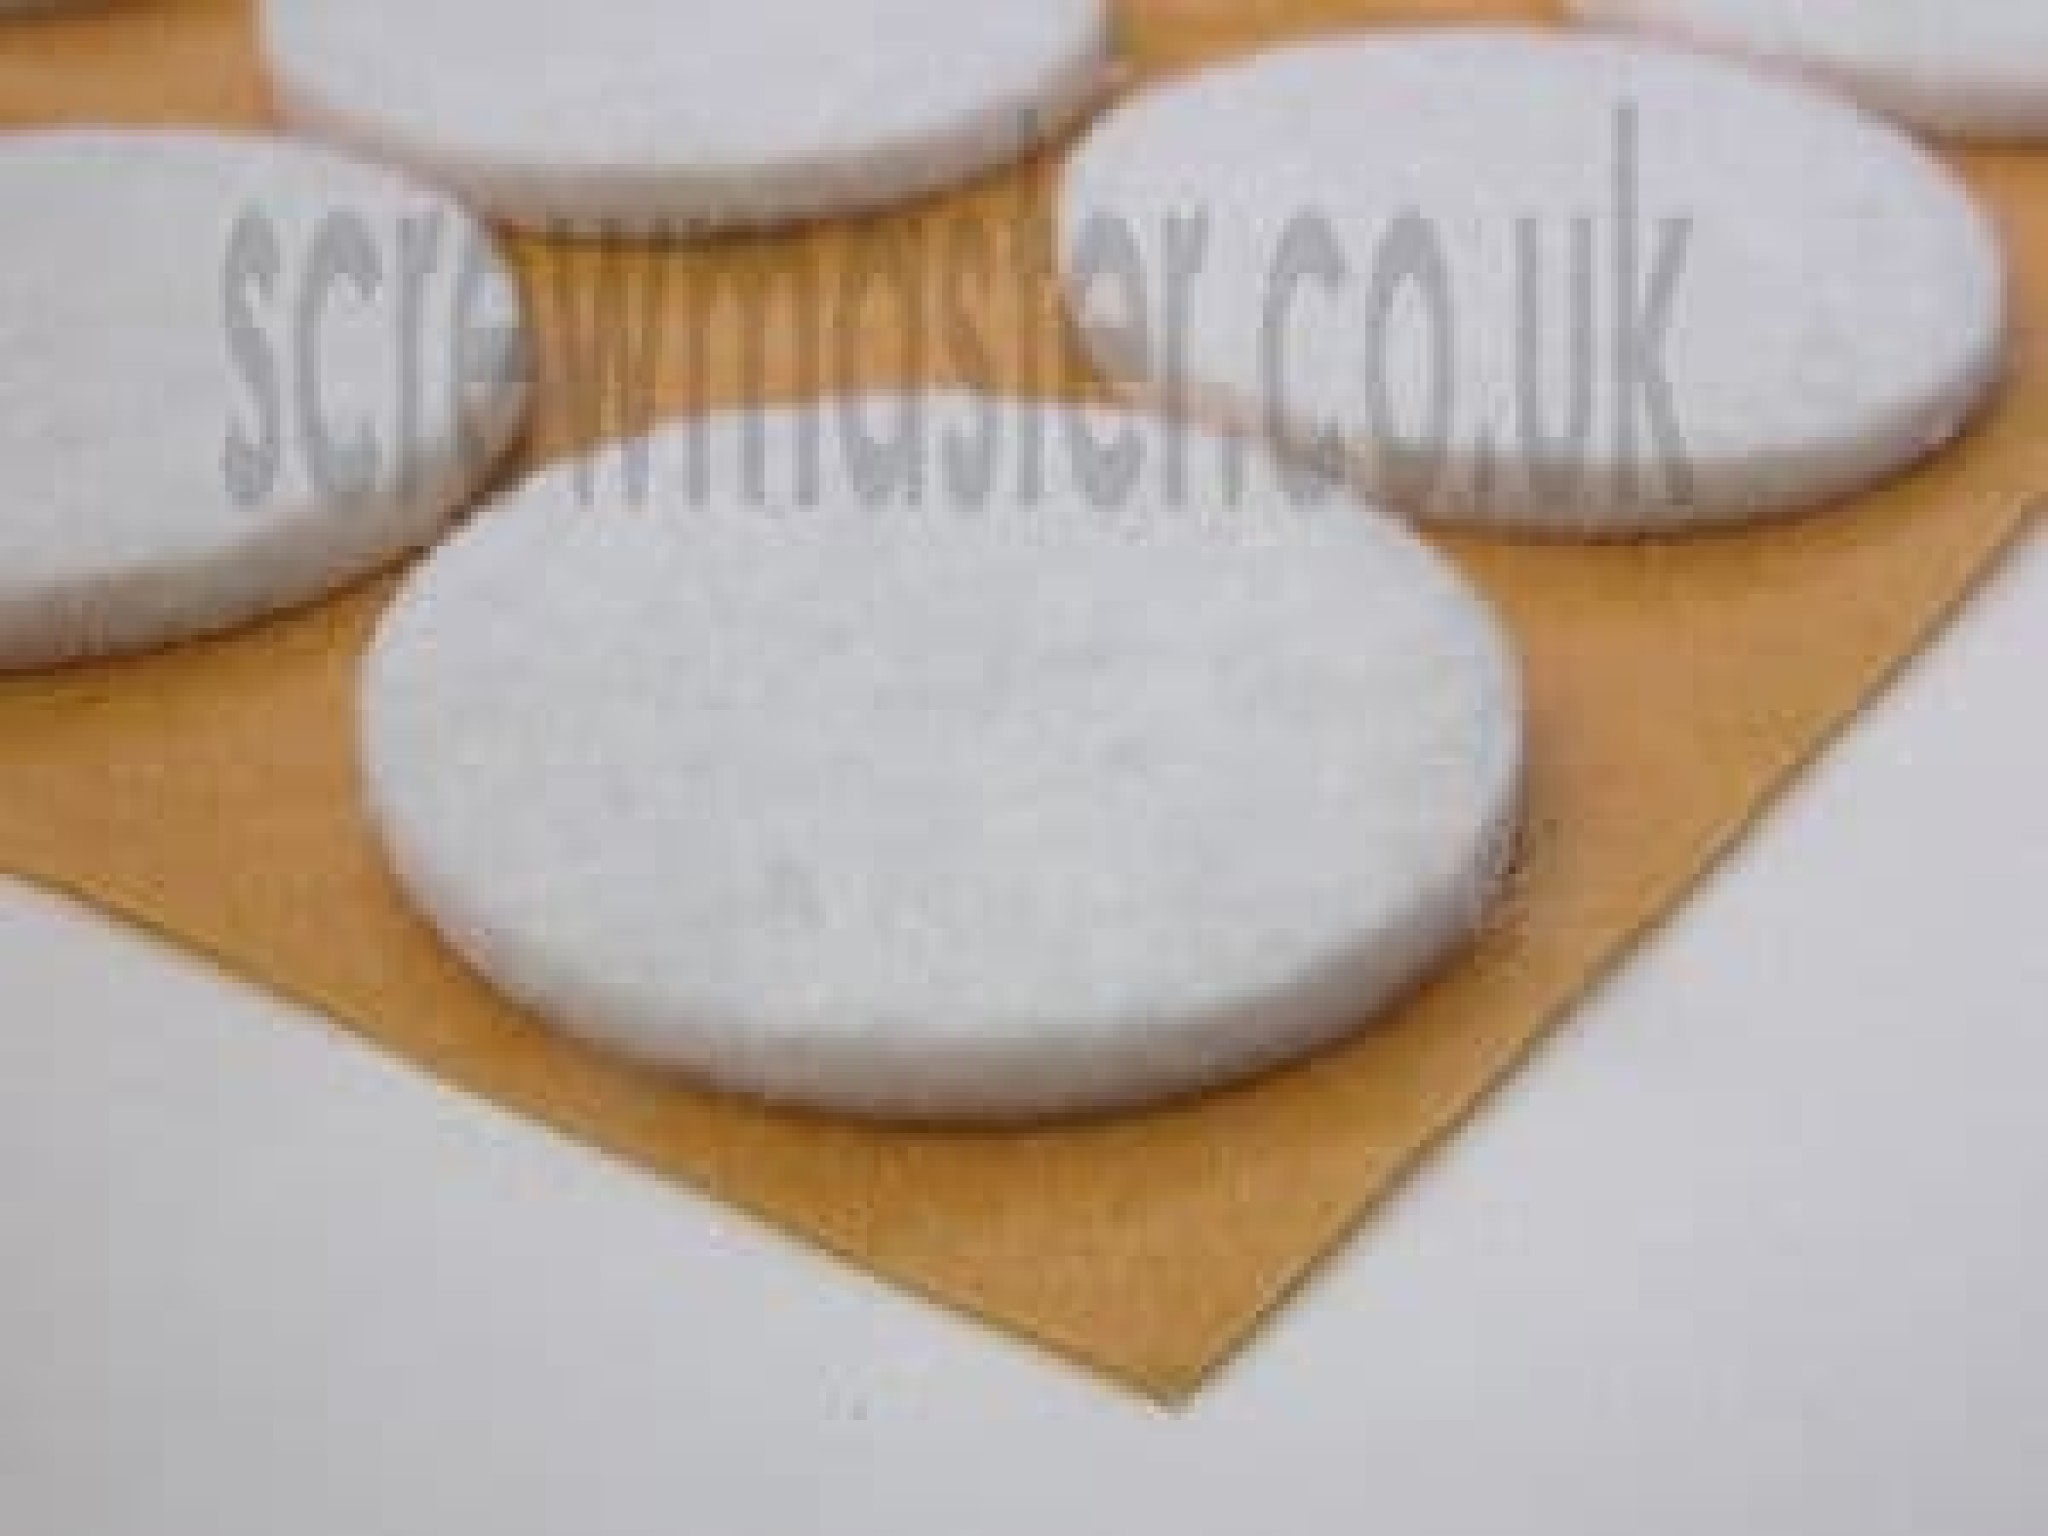 12-white-felt-pads-18mm-diameter-protect-floor-from-scratching-self-adhesive-sticky-193-p.jpg